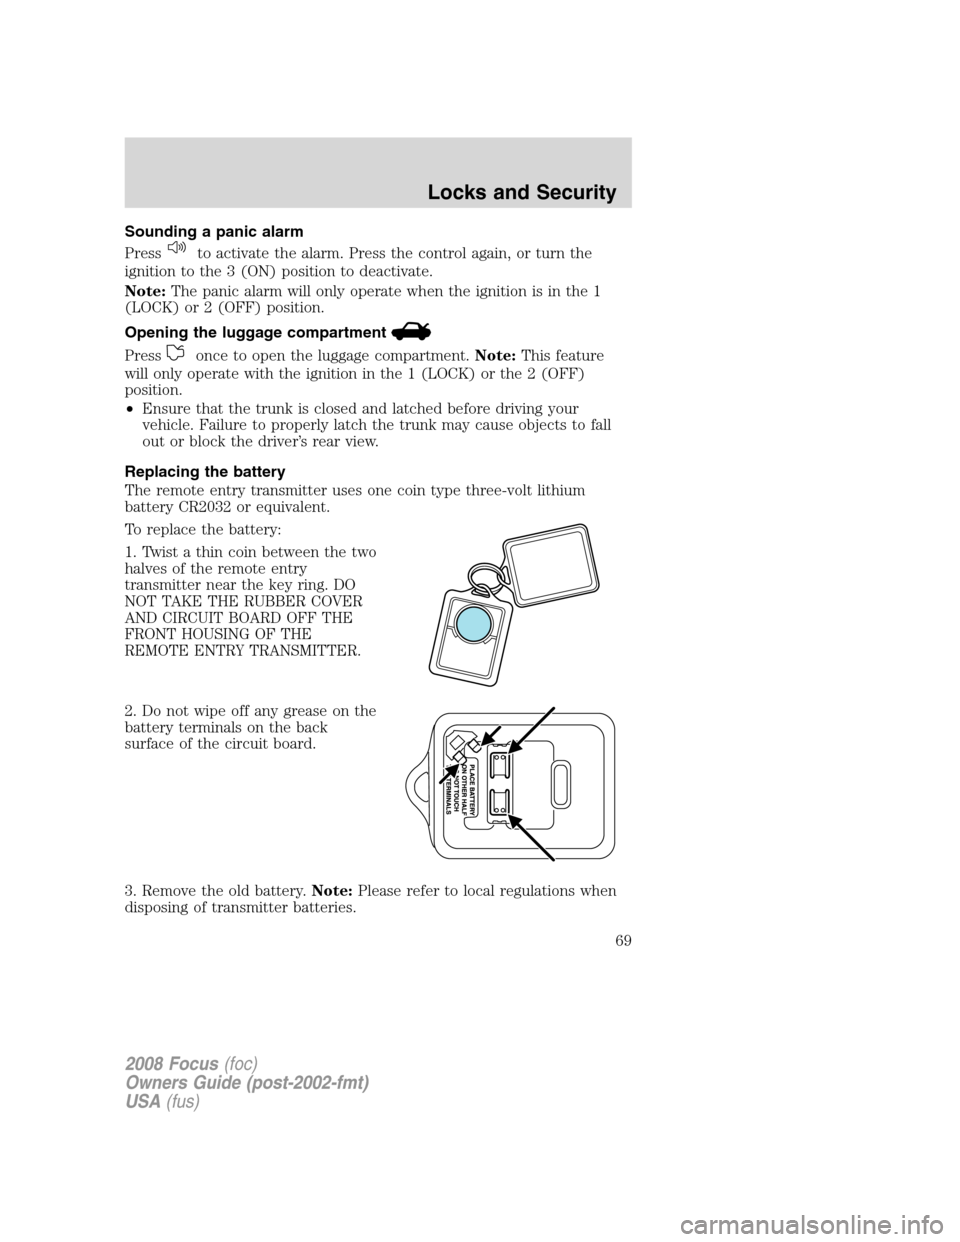 FORD FOCUS 2008 2.G Repair Manual Sounding a panic alarm
Press
to activate the alarm. Press the control again, or turn the
ignition to the 3 (ON) position to deactivate.
Note:The panic alarm will only operate when the ignition is in t